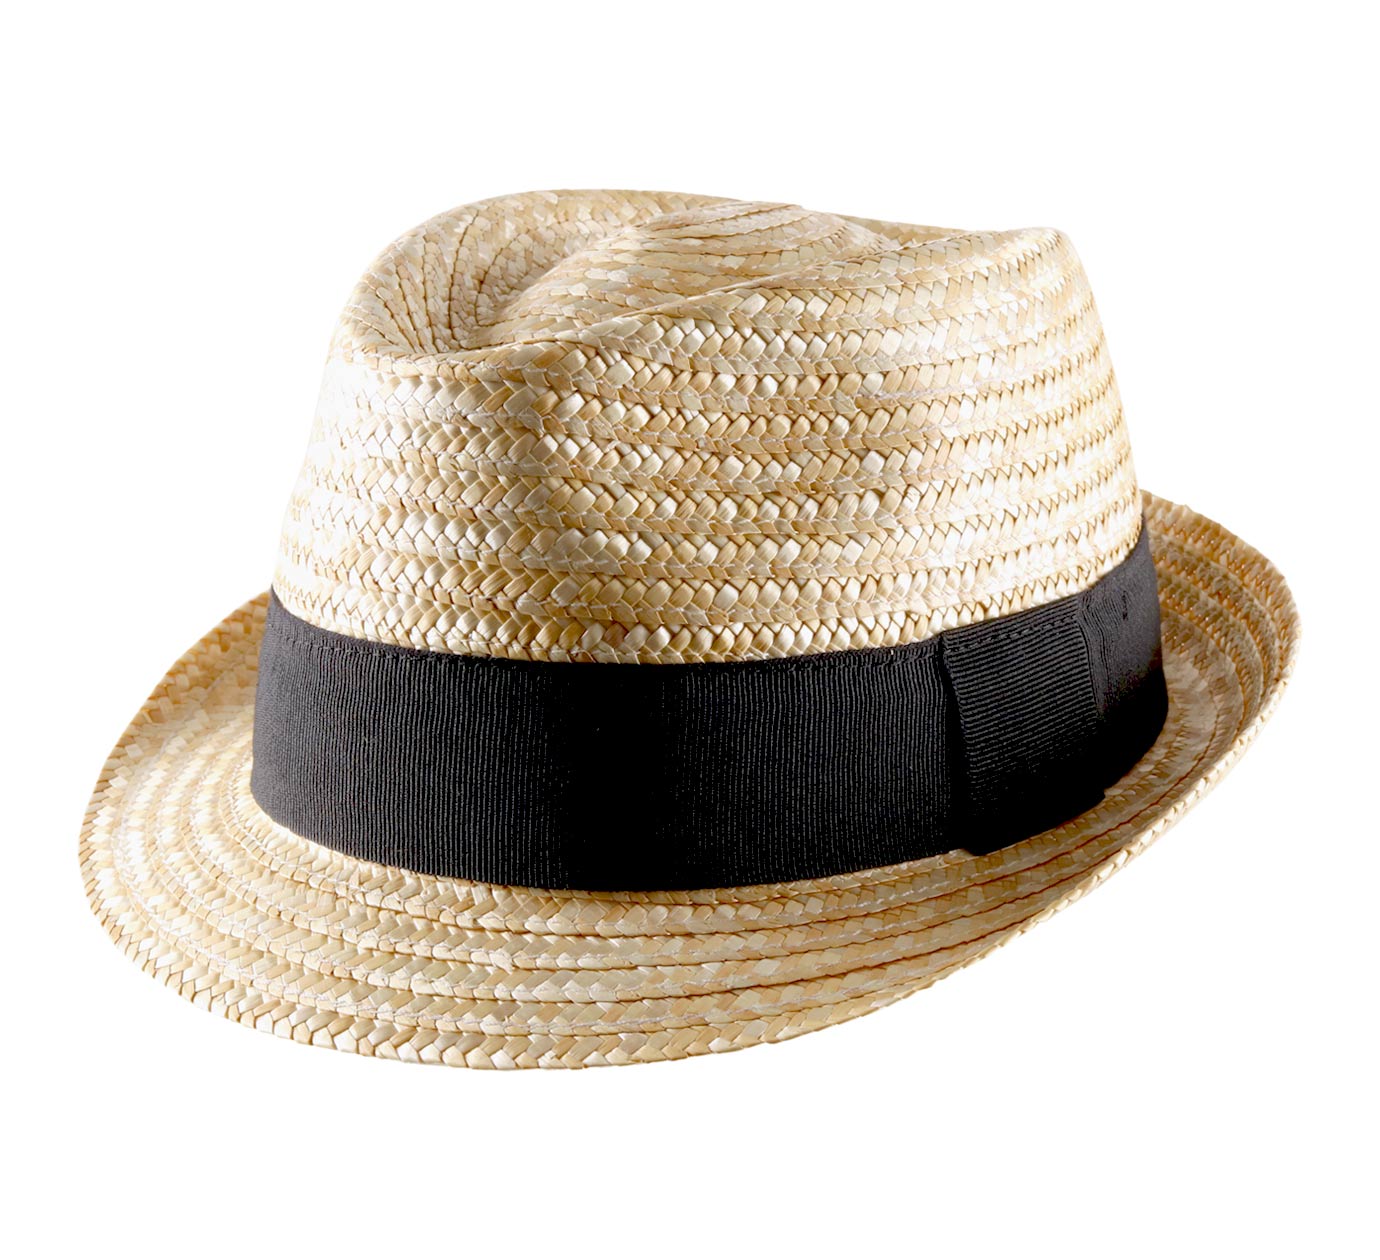 Classic Italy Classic Paille Large Panama Hat Size 62 cm Creme-Brown